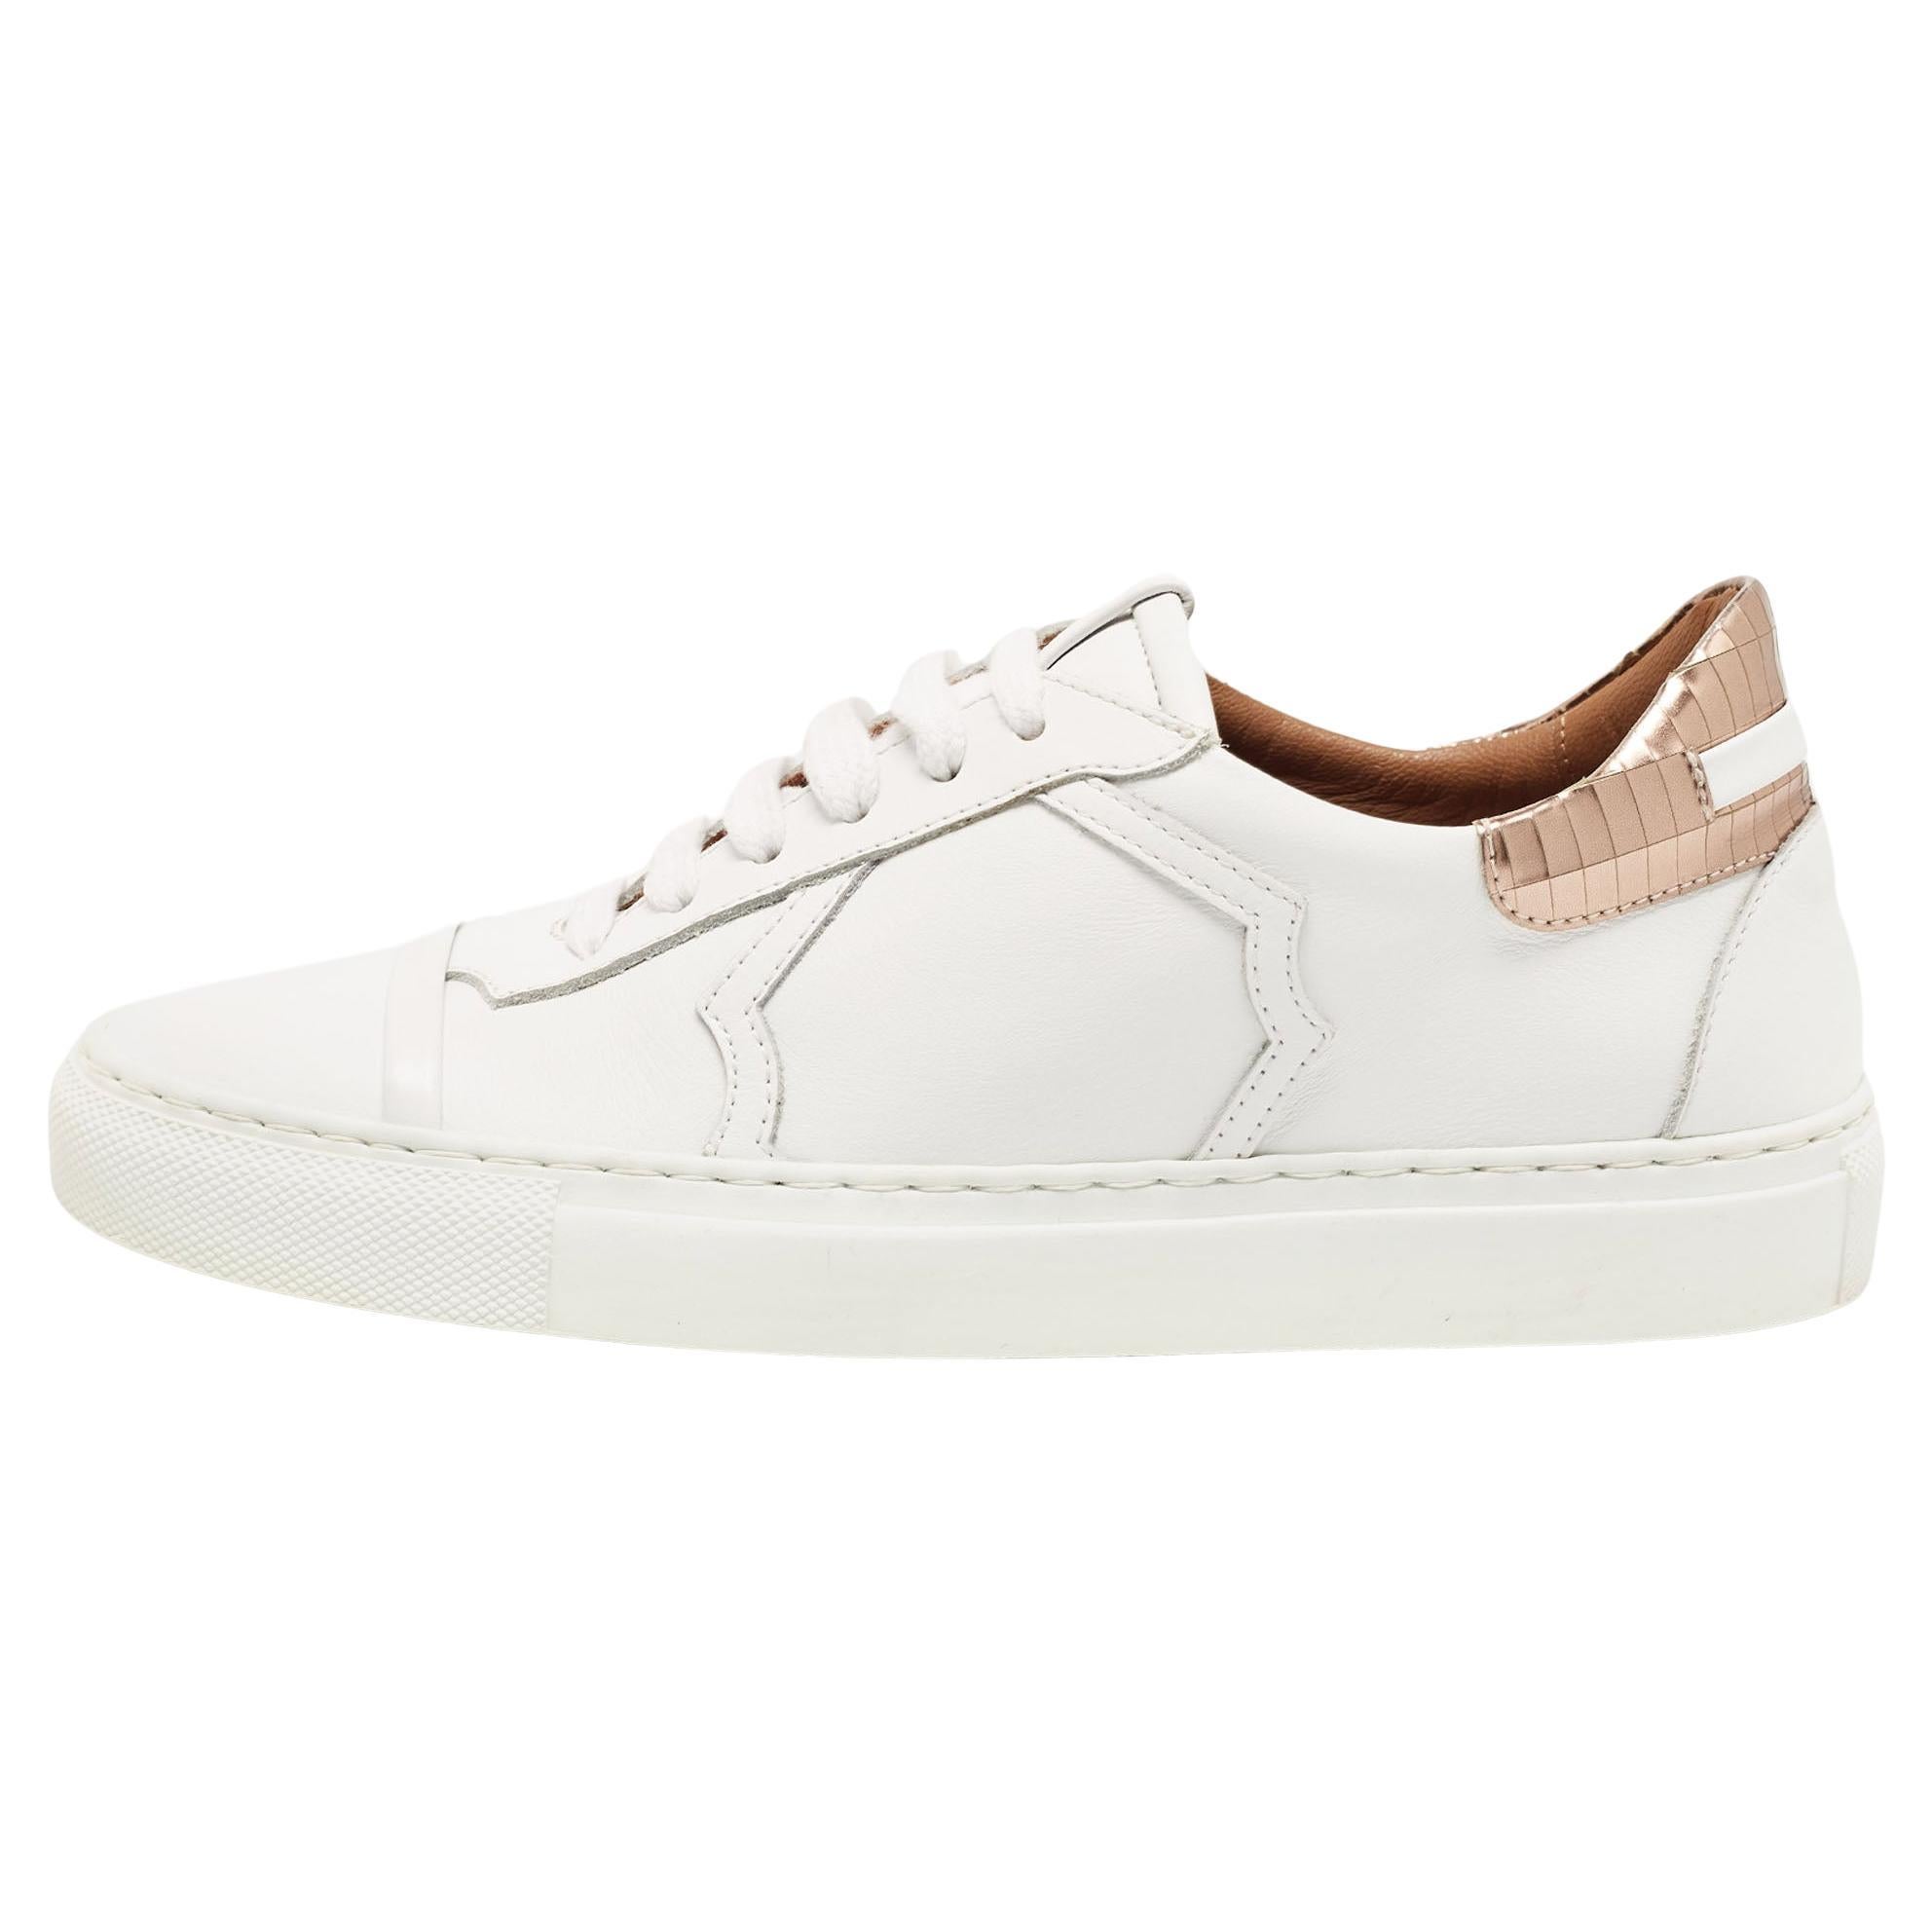 Malone Souliers White/Rose Gold Leather Musa Sneakers Size 36 For Sale